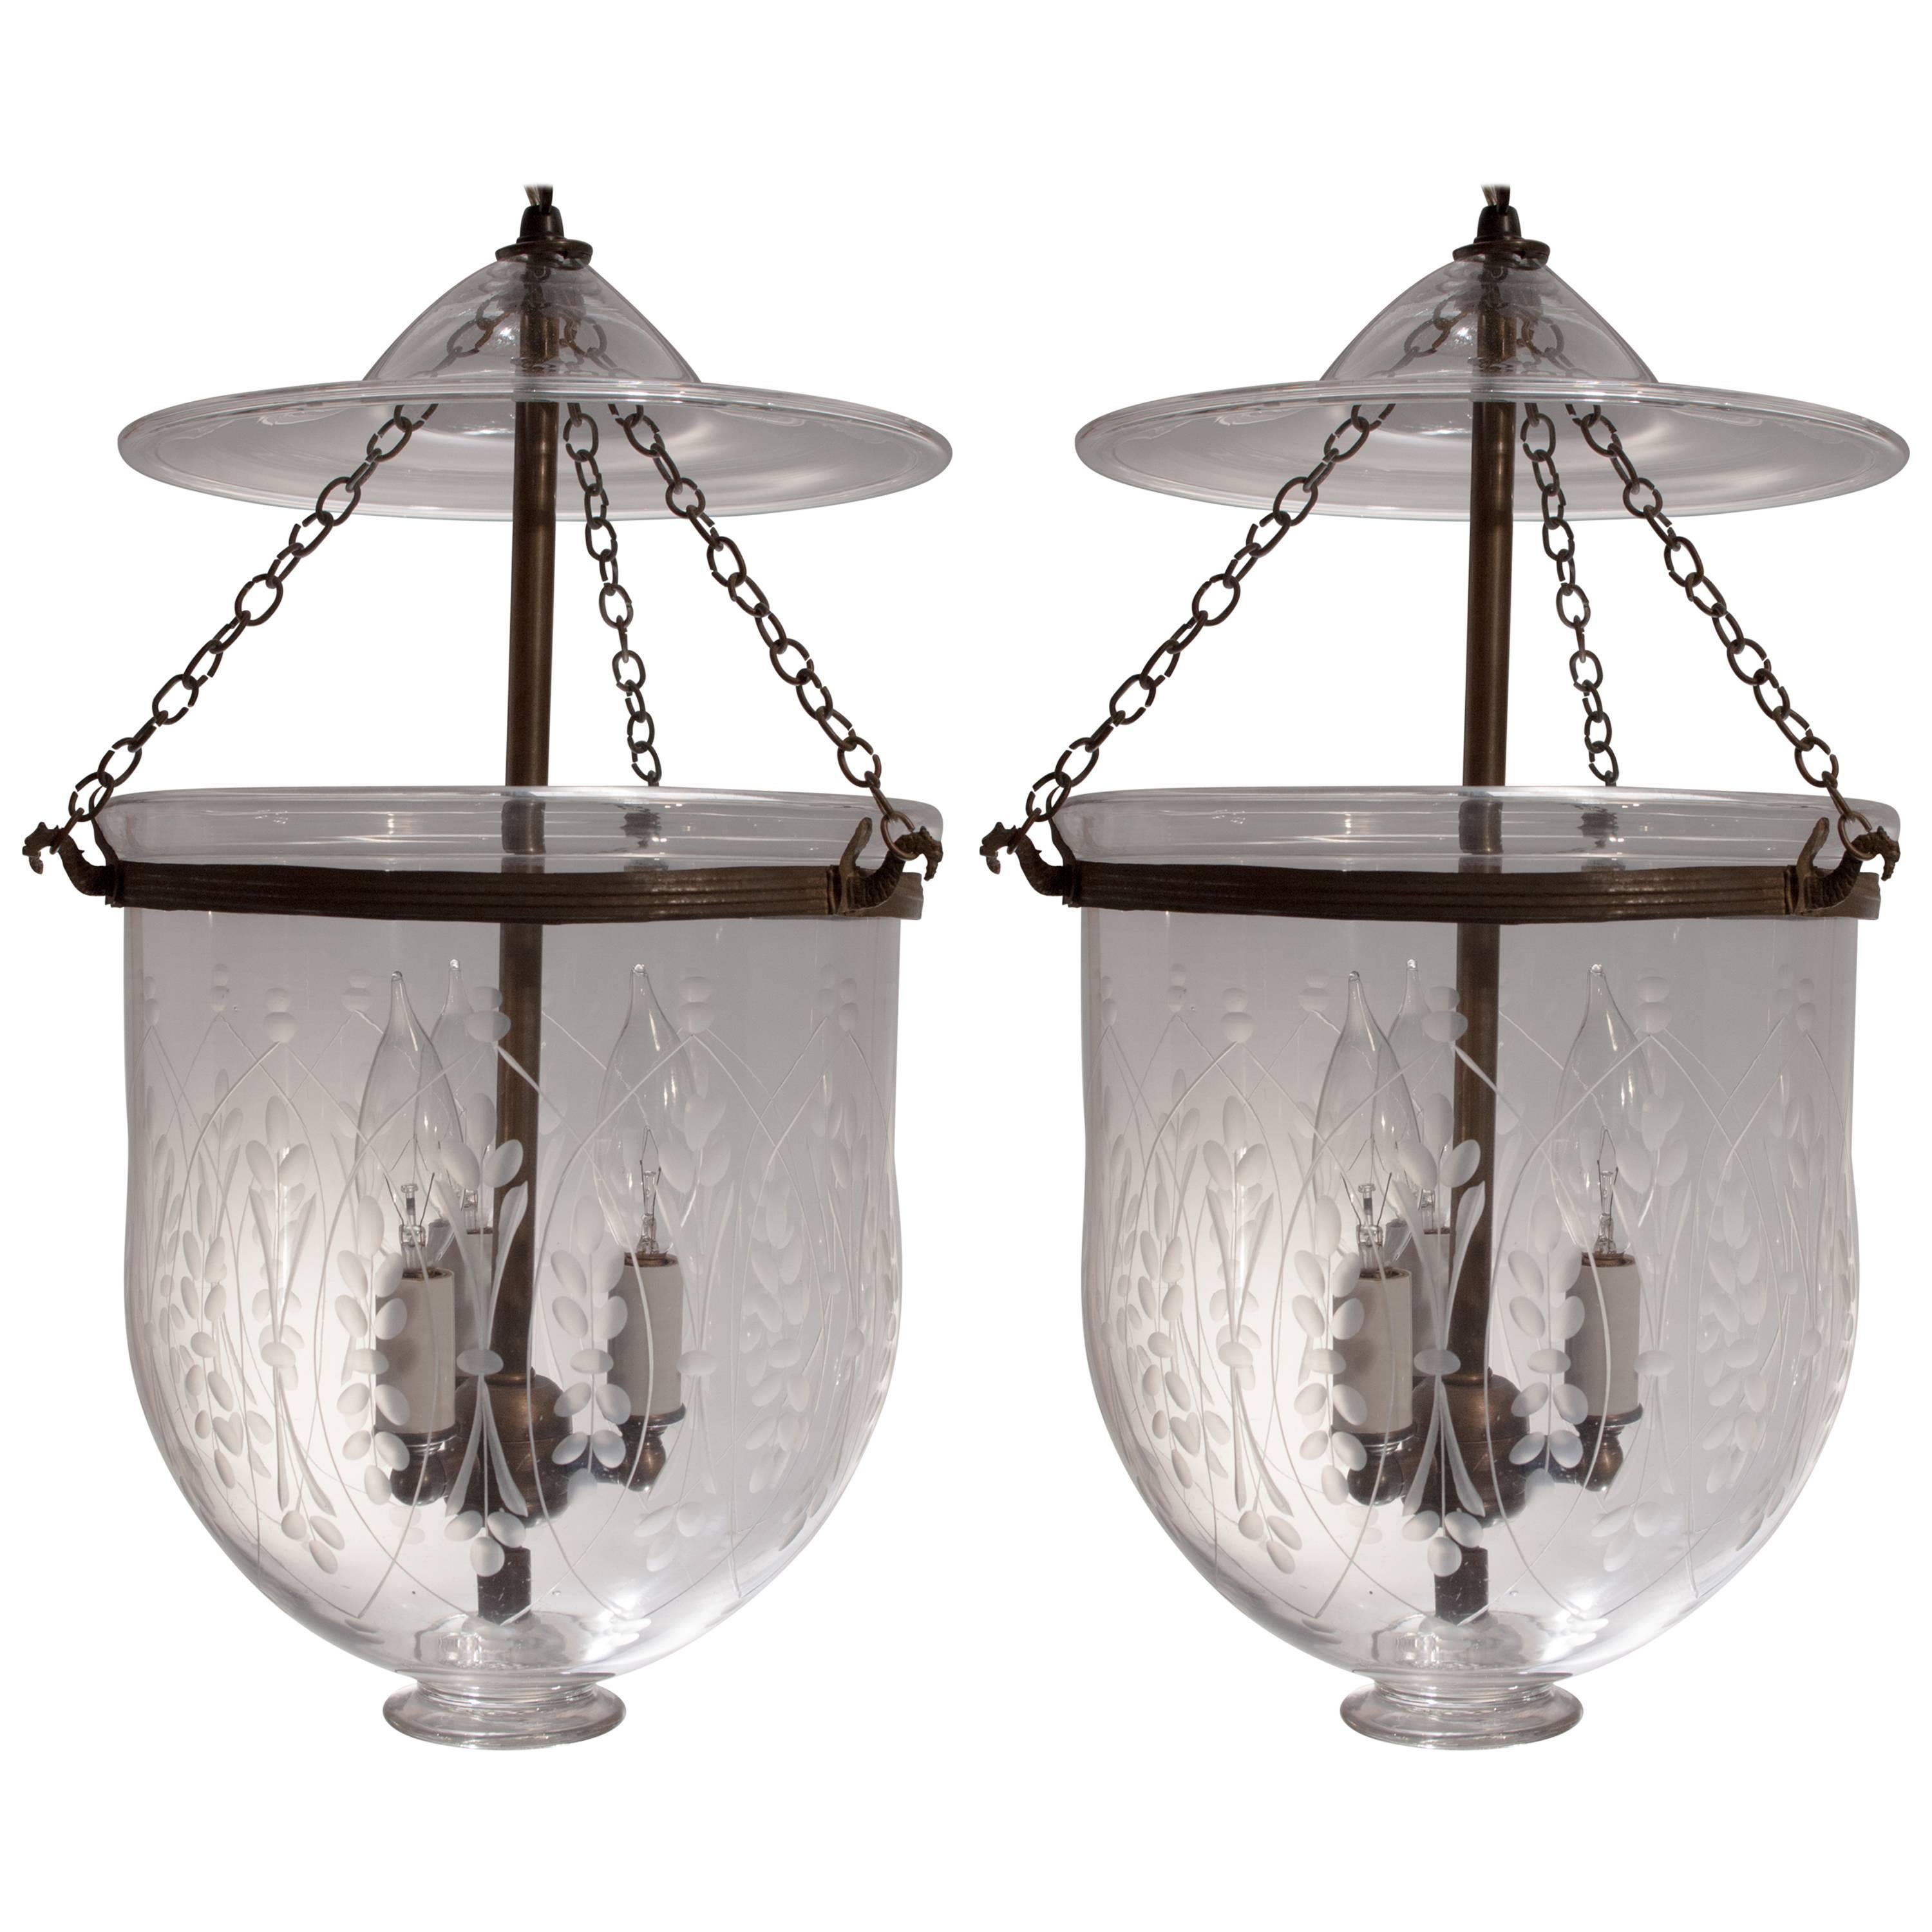 Pair of Bell Jar Lanterns with "Wheat" Etching